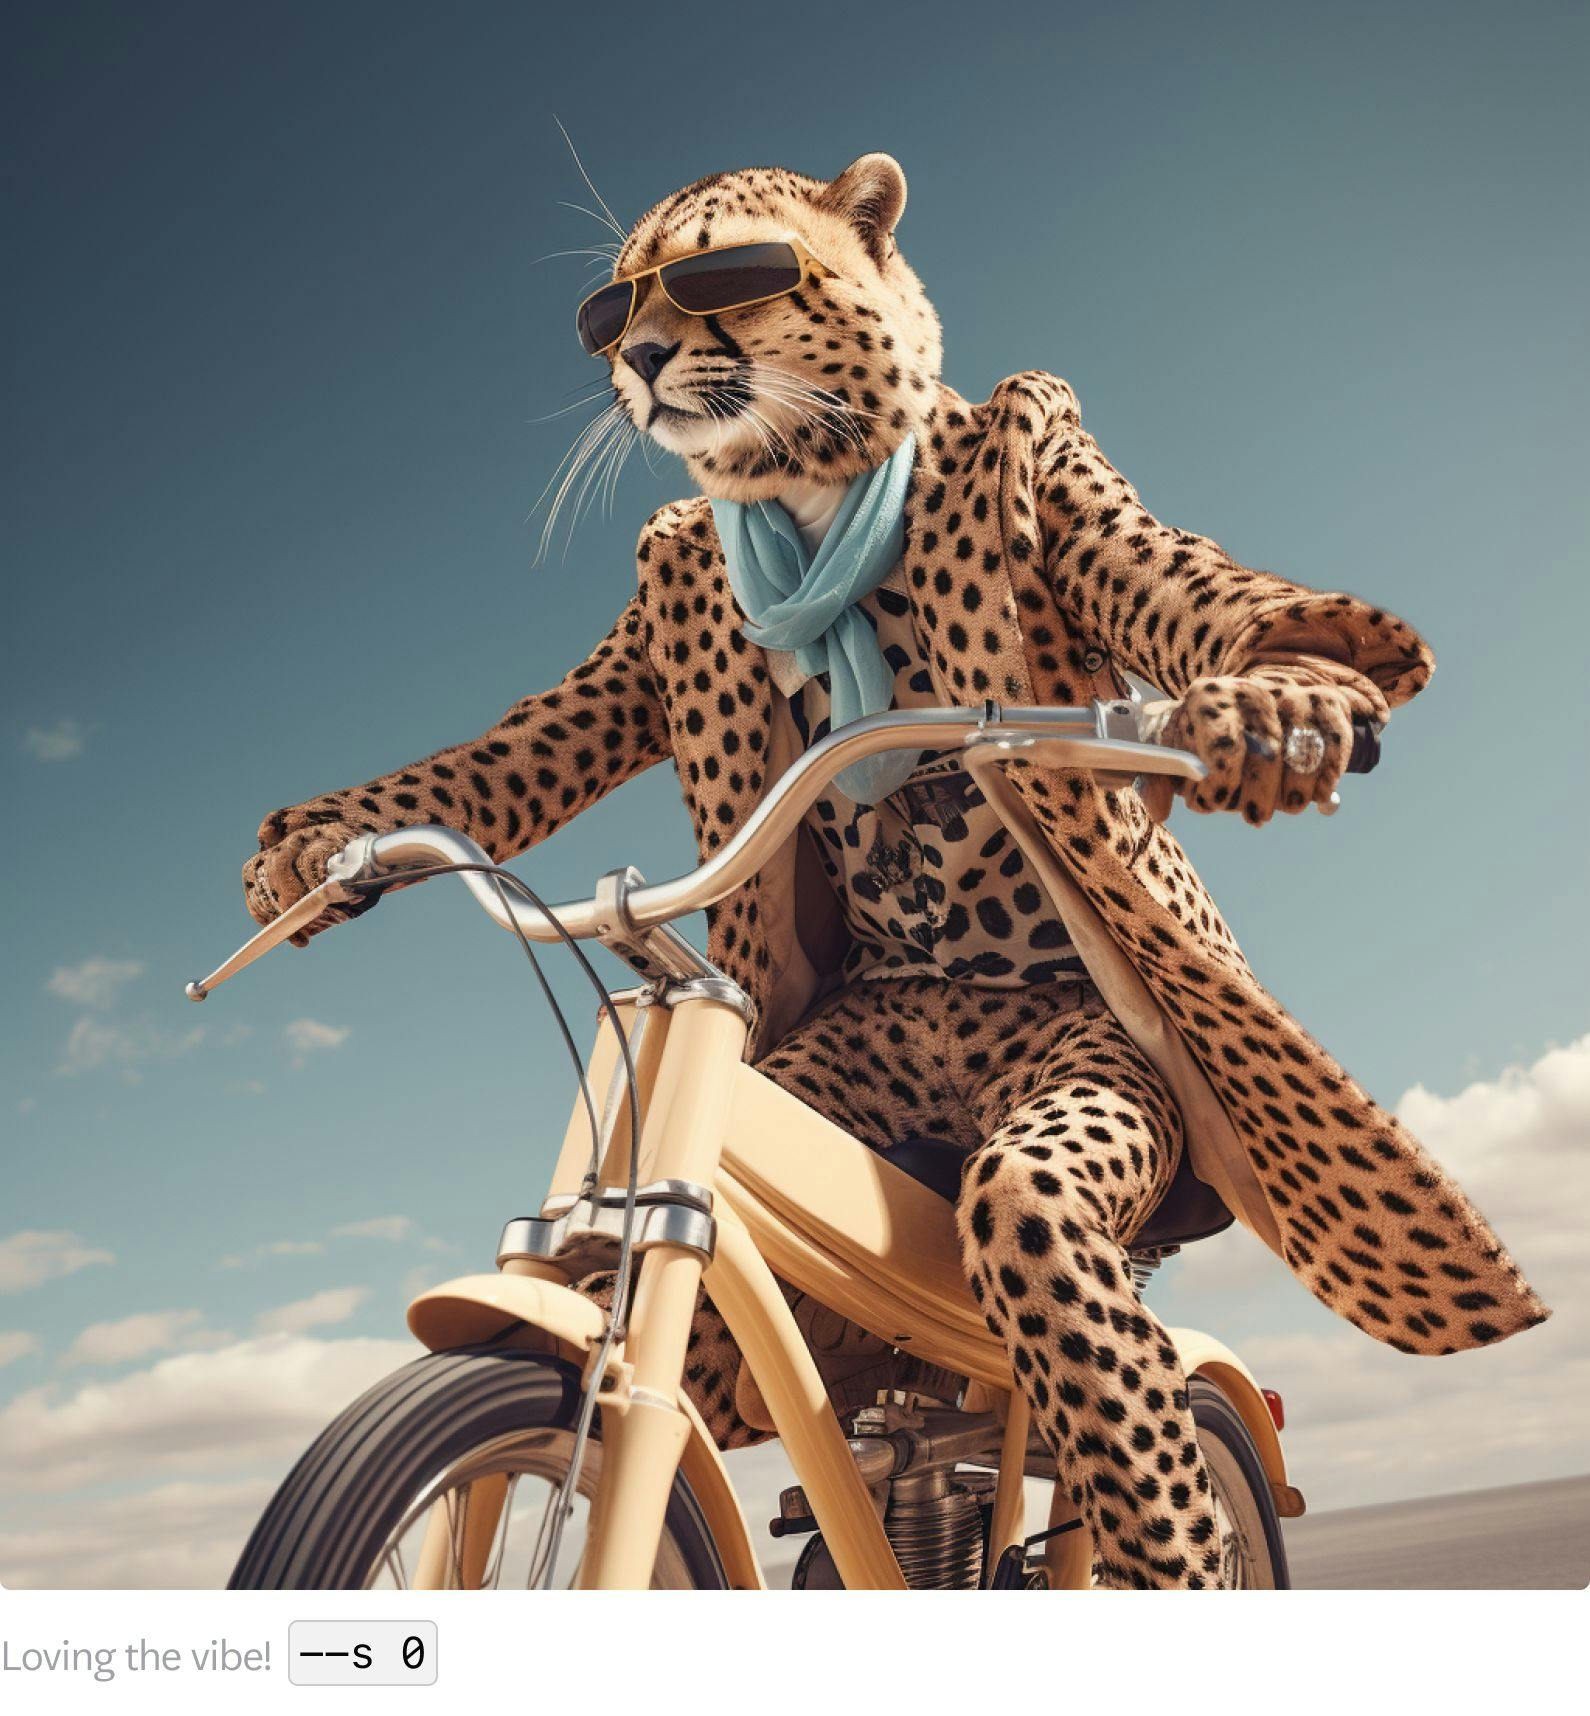 /imagine cheetah with sunglasses in fashionable clothes riding a racing bike